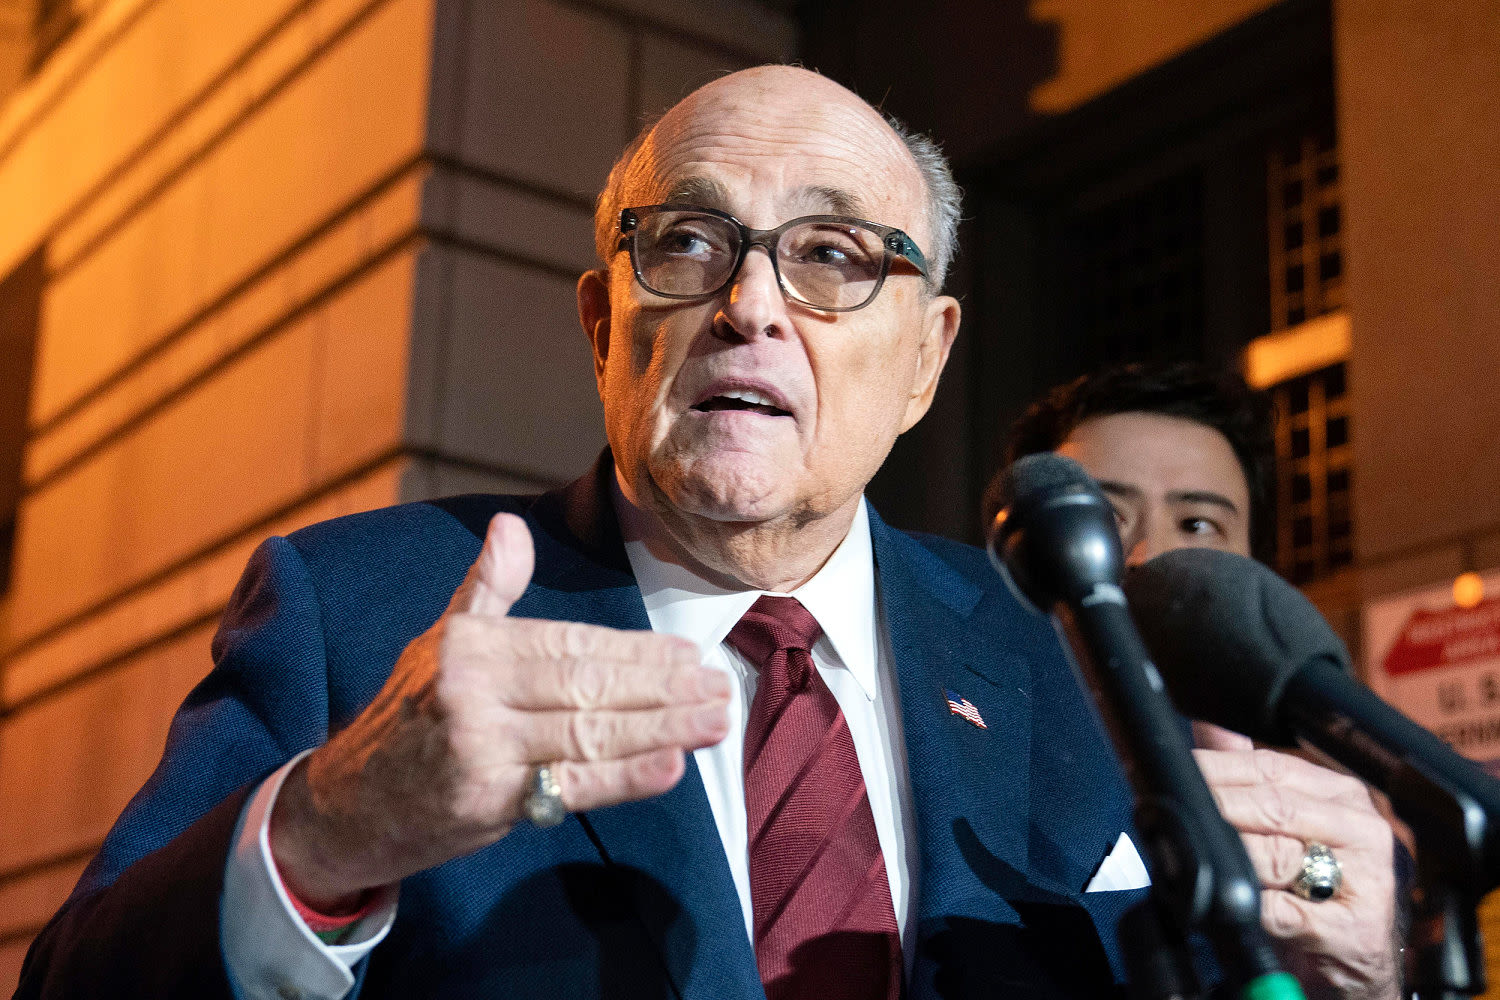 Radio station suspends Rudy Giuliani and cancels his talk show over 2020 election remarks